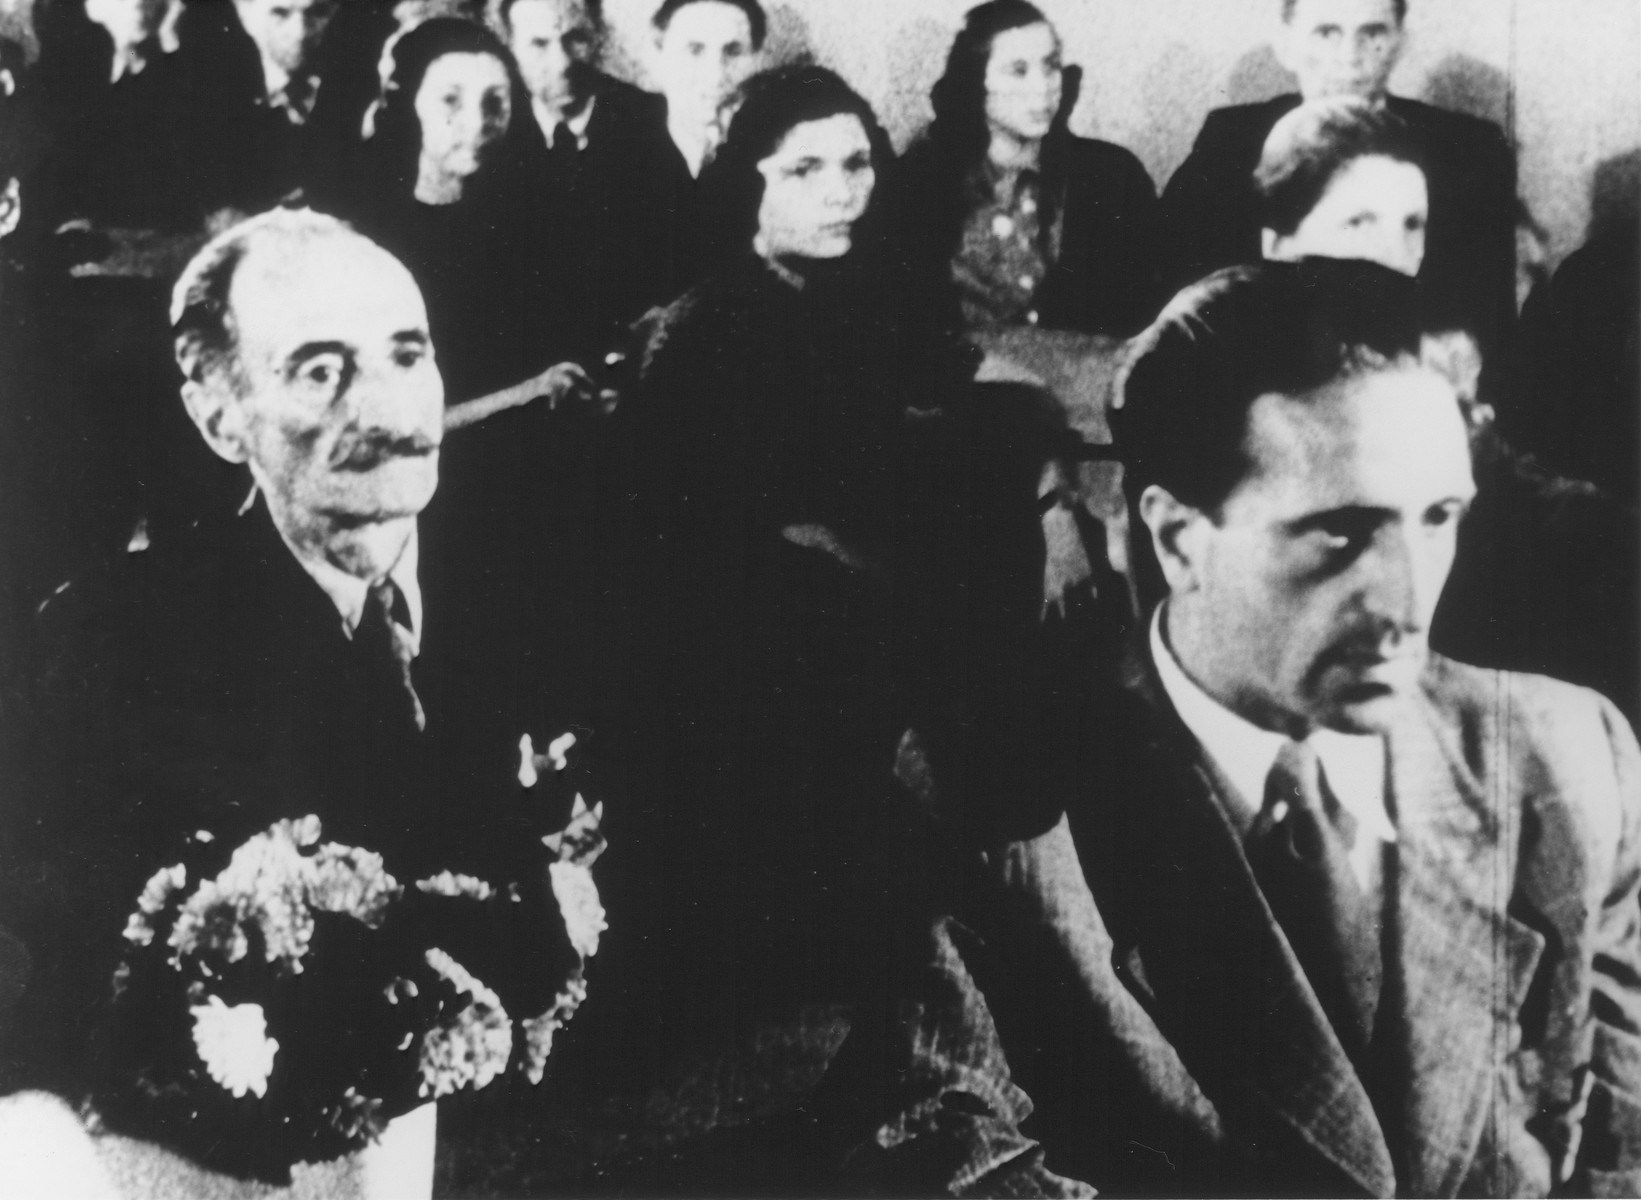 STILL PHOTOGRAPH FROM THE NAZI PROPAGANDA FILM, "Der Fuehrer Schenkt den Juden eine Stadt" [The Fuehrer gives the Jews a City].  Jews watching a performance in the Theresienstadt ghetto.

The man on the right is Pavel Haas, who is actually listening to his Study for Strings performed by the Ghetto Orchestra